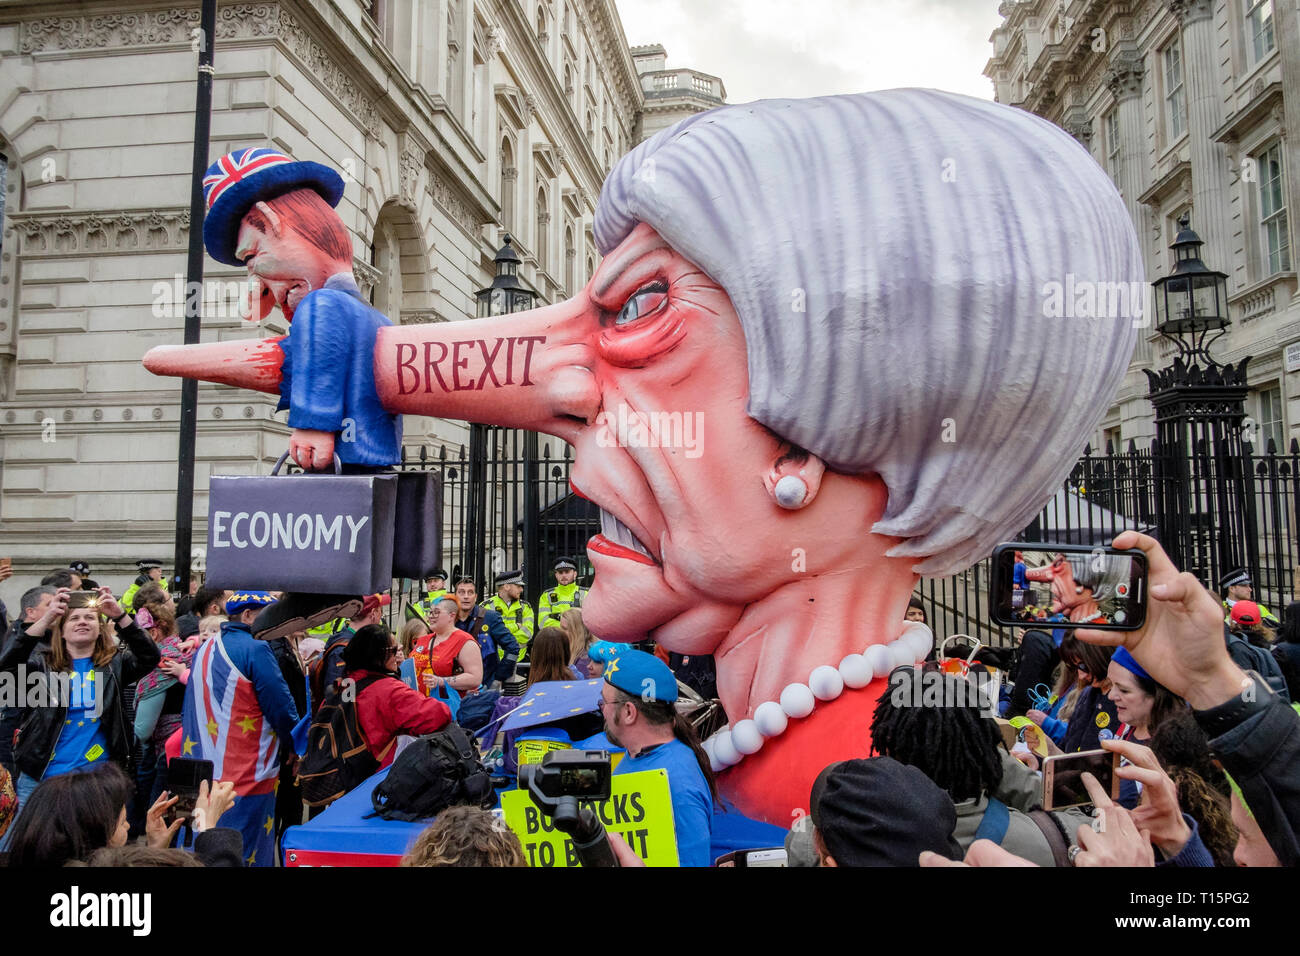 London, UK. 23rd March 2019. Hundreds of thousands of people march through central London demanding a second vote on the UK's membership of the European Union. Pictured: A float depicting Theresa May and the effect Brexit will have on the British economy is positioned at the entrance to Downing Street. Credit: mark phillips/Alamy Live News Stock Photo